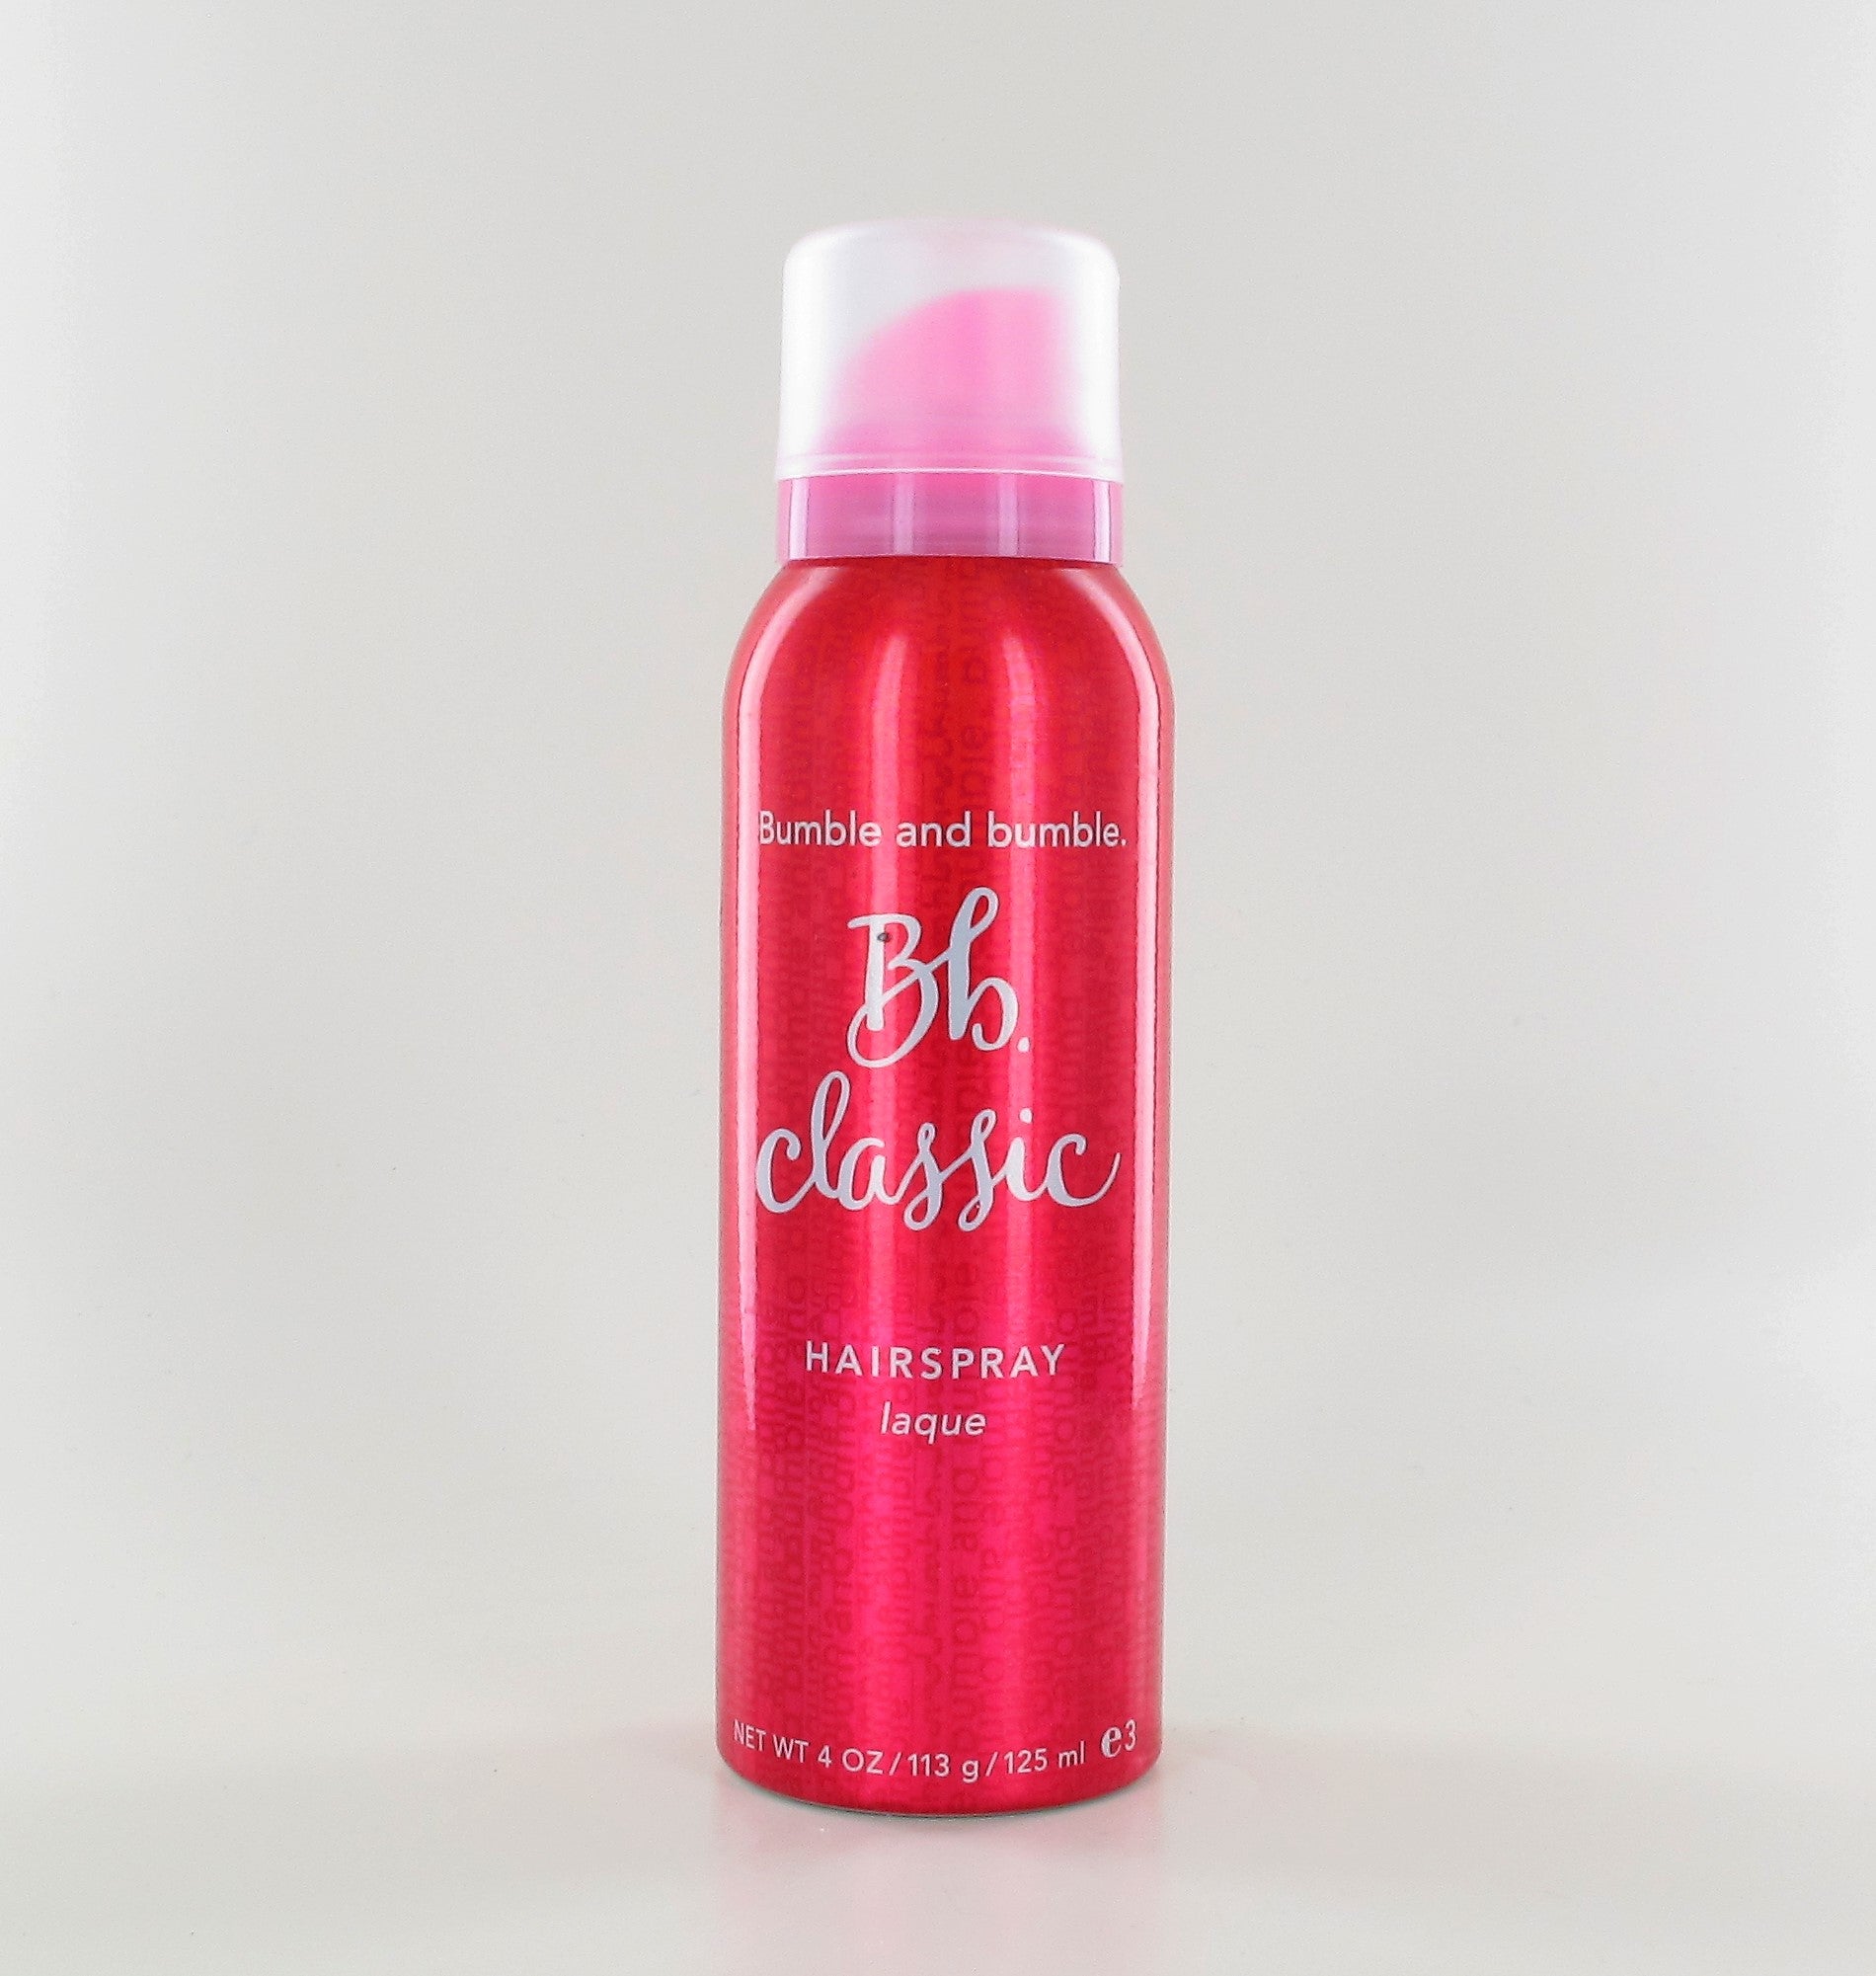 BUMBLE AND BUMBLE Classic Hairspray 4 oz